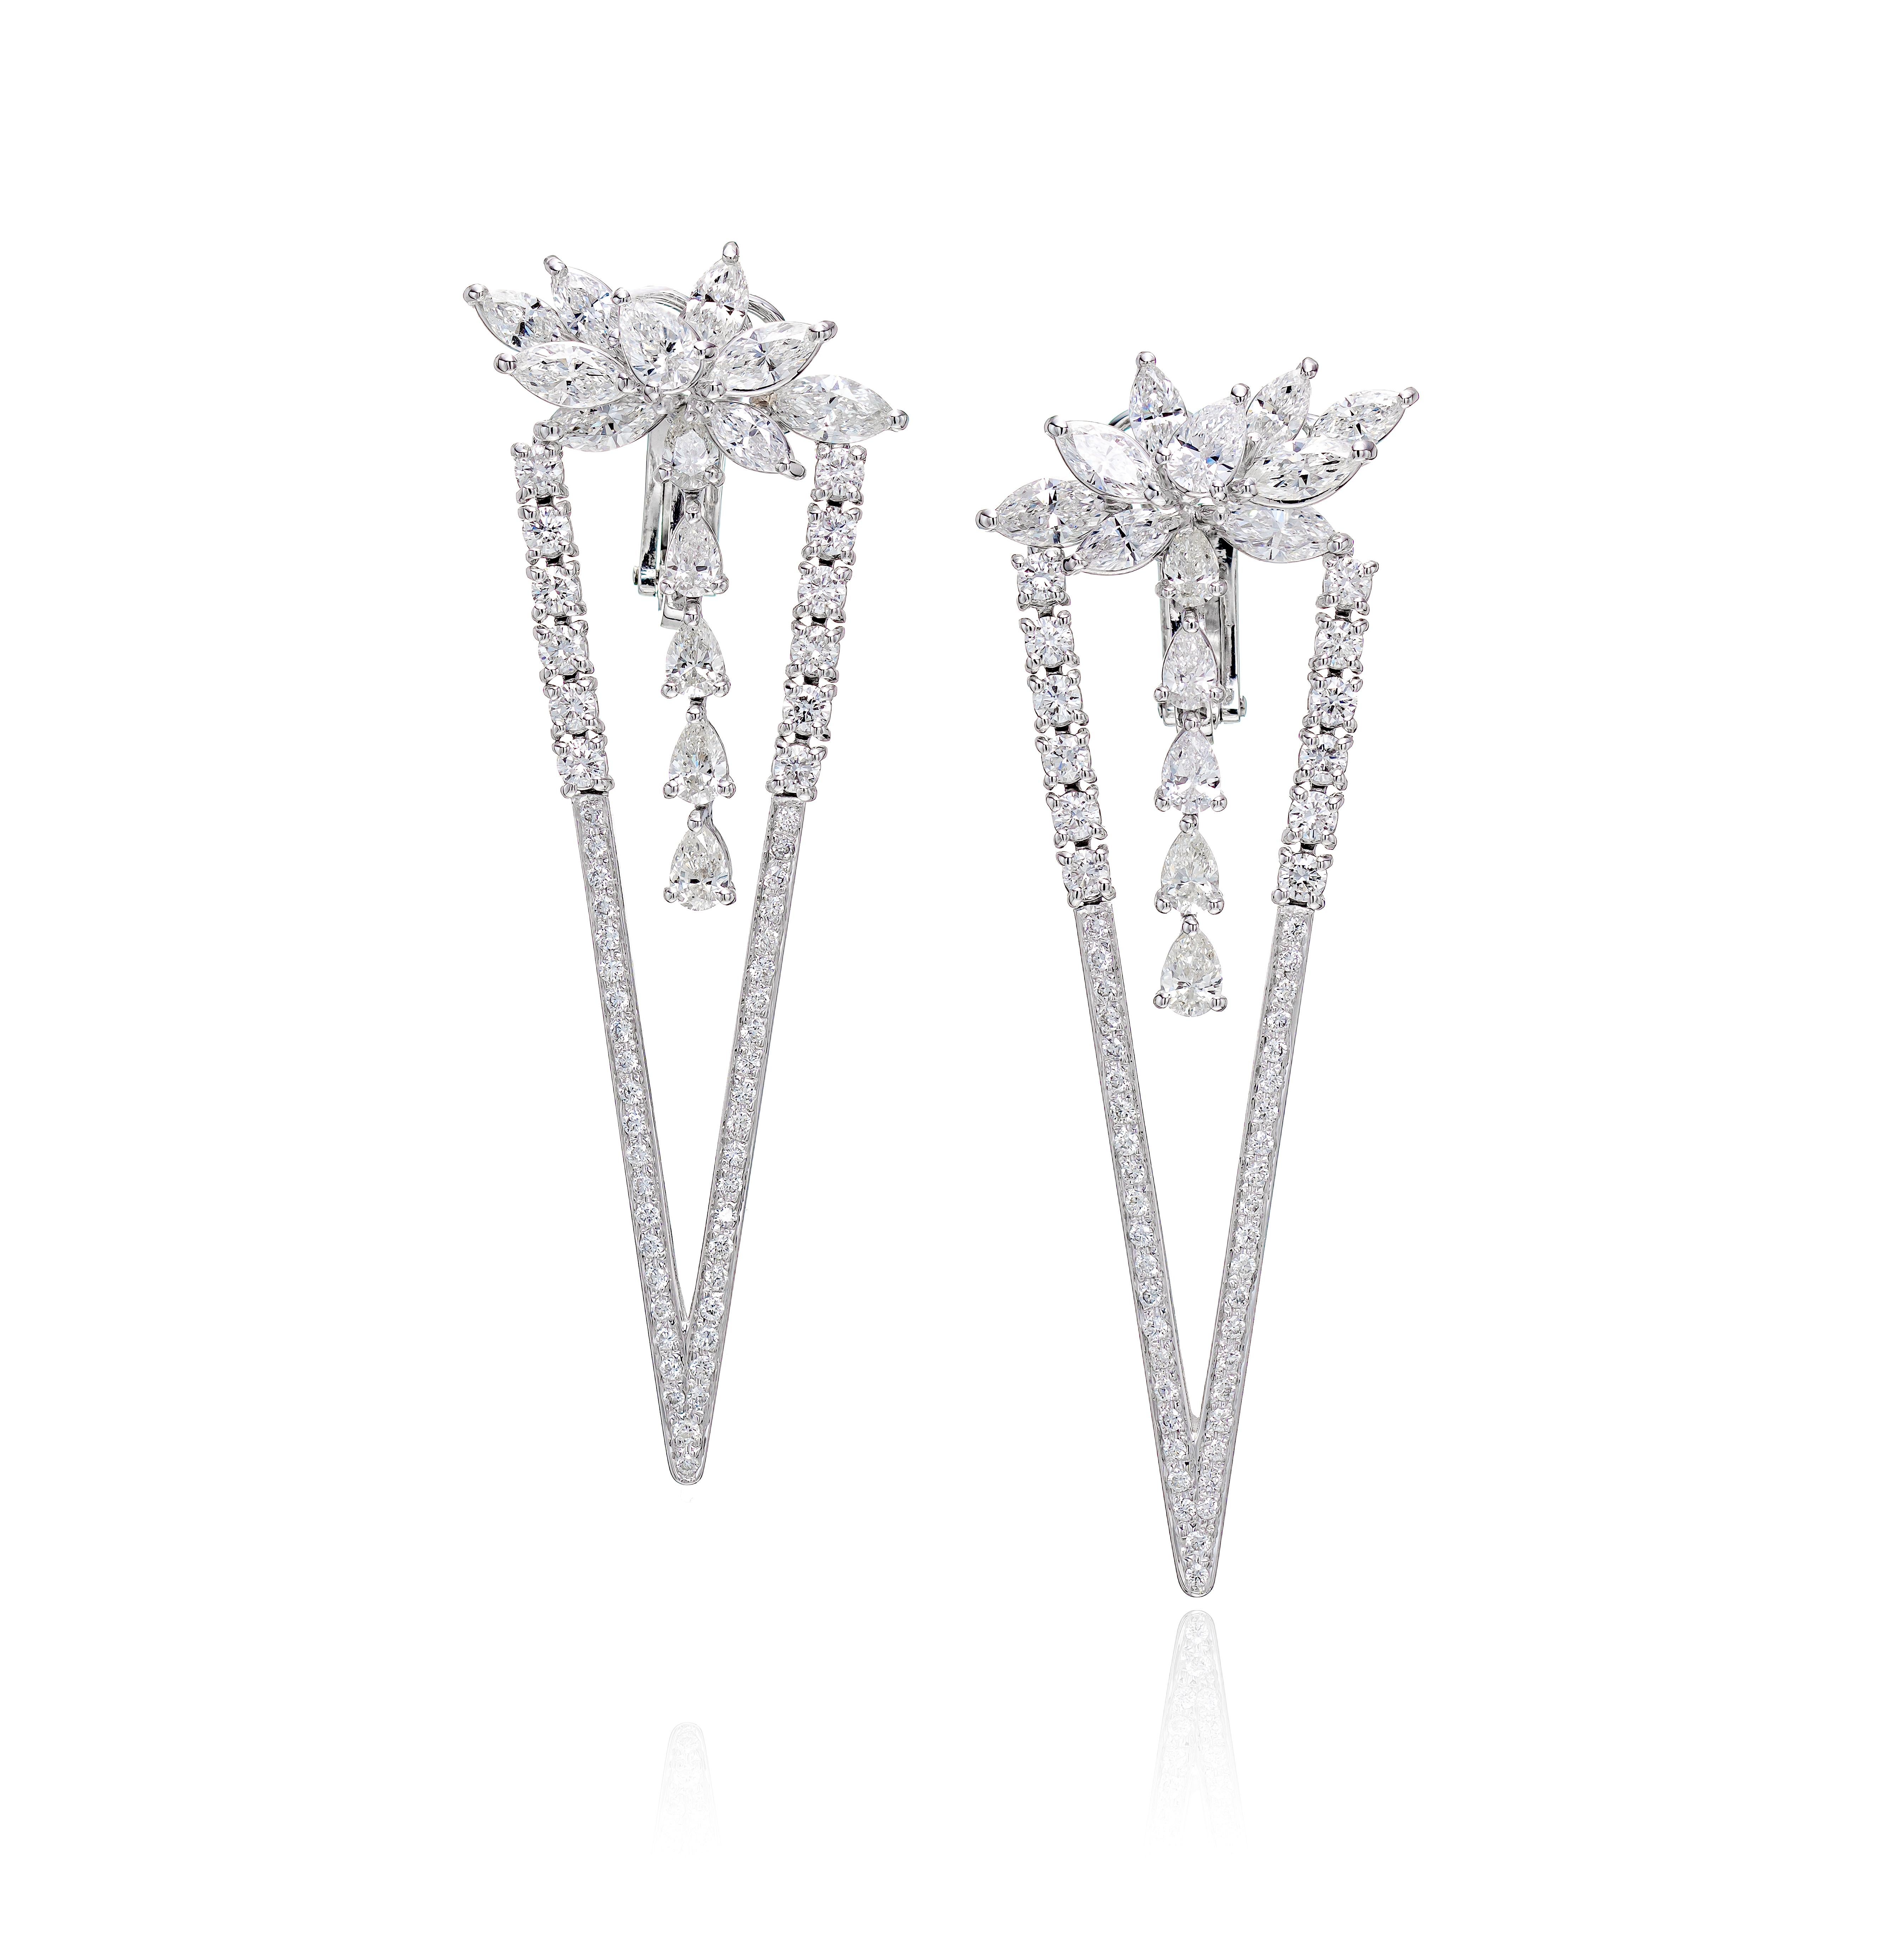 Contemporary 4.88 Carat Diamond Wings Triangle Earrings in 18k White Gold For Sale